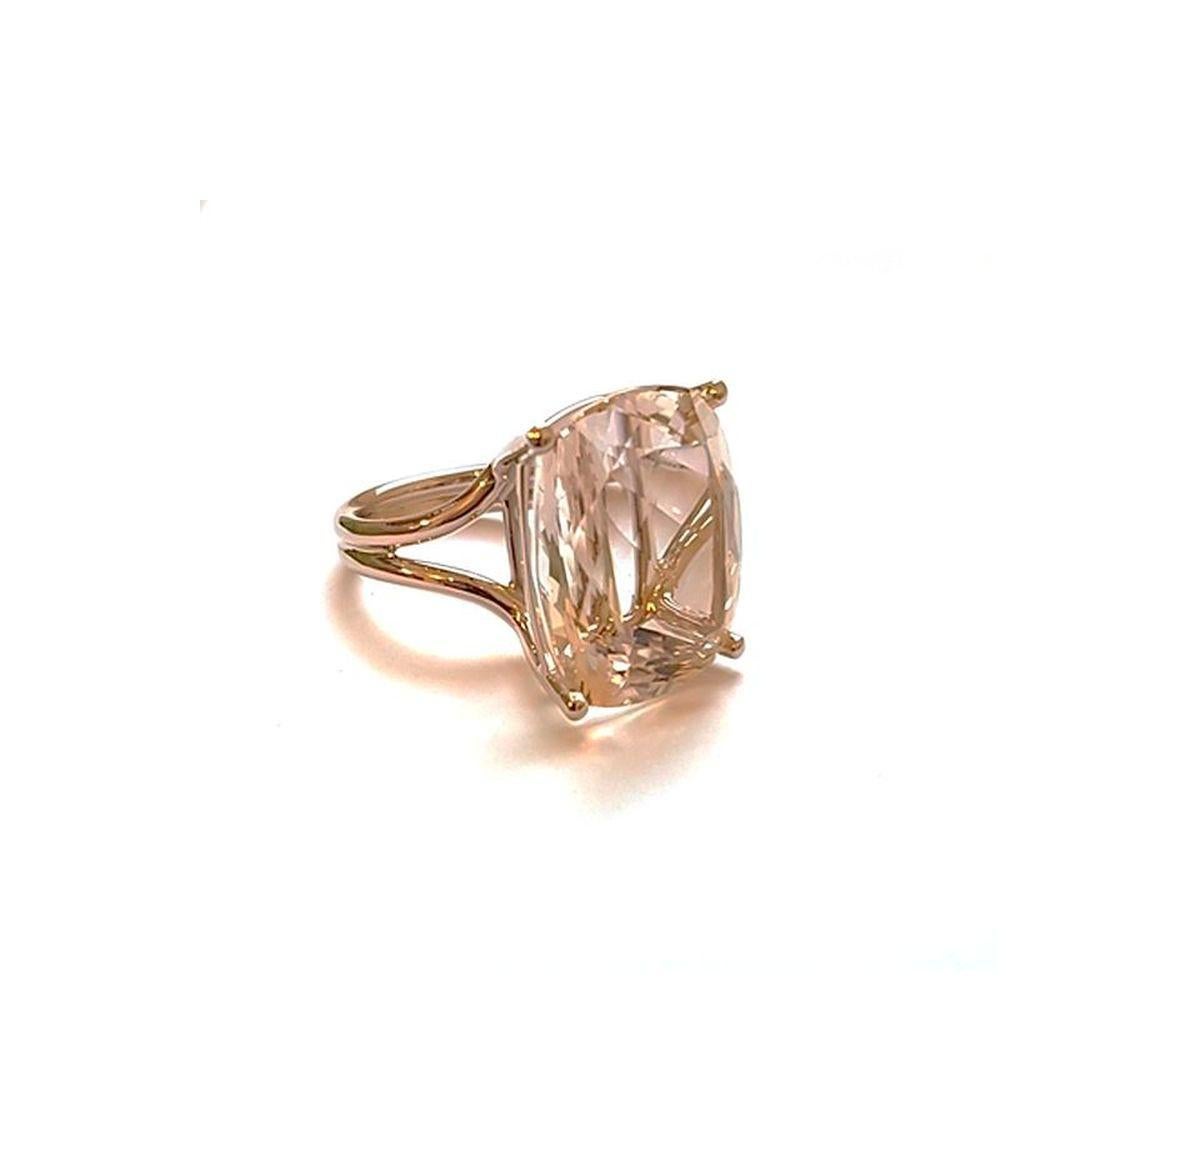 33.57 Carat Precious Topaz Gold Ring by Wagner Preziosen For Sale 4